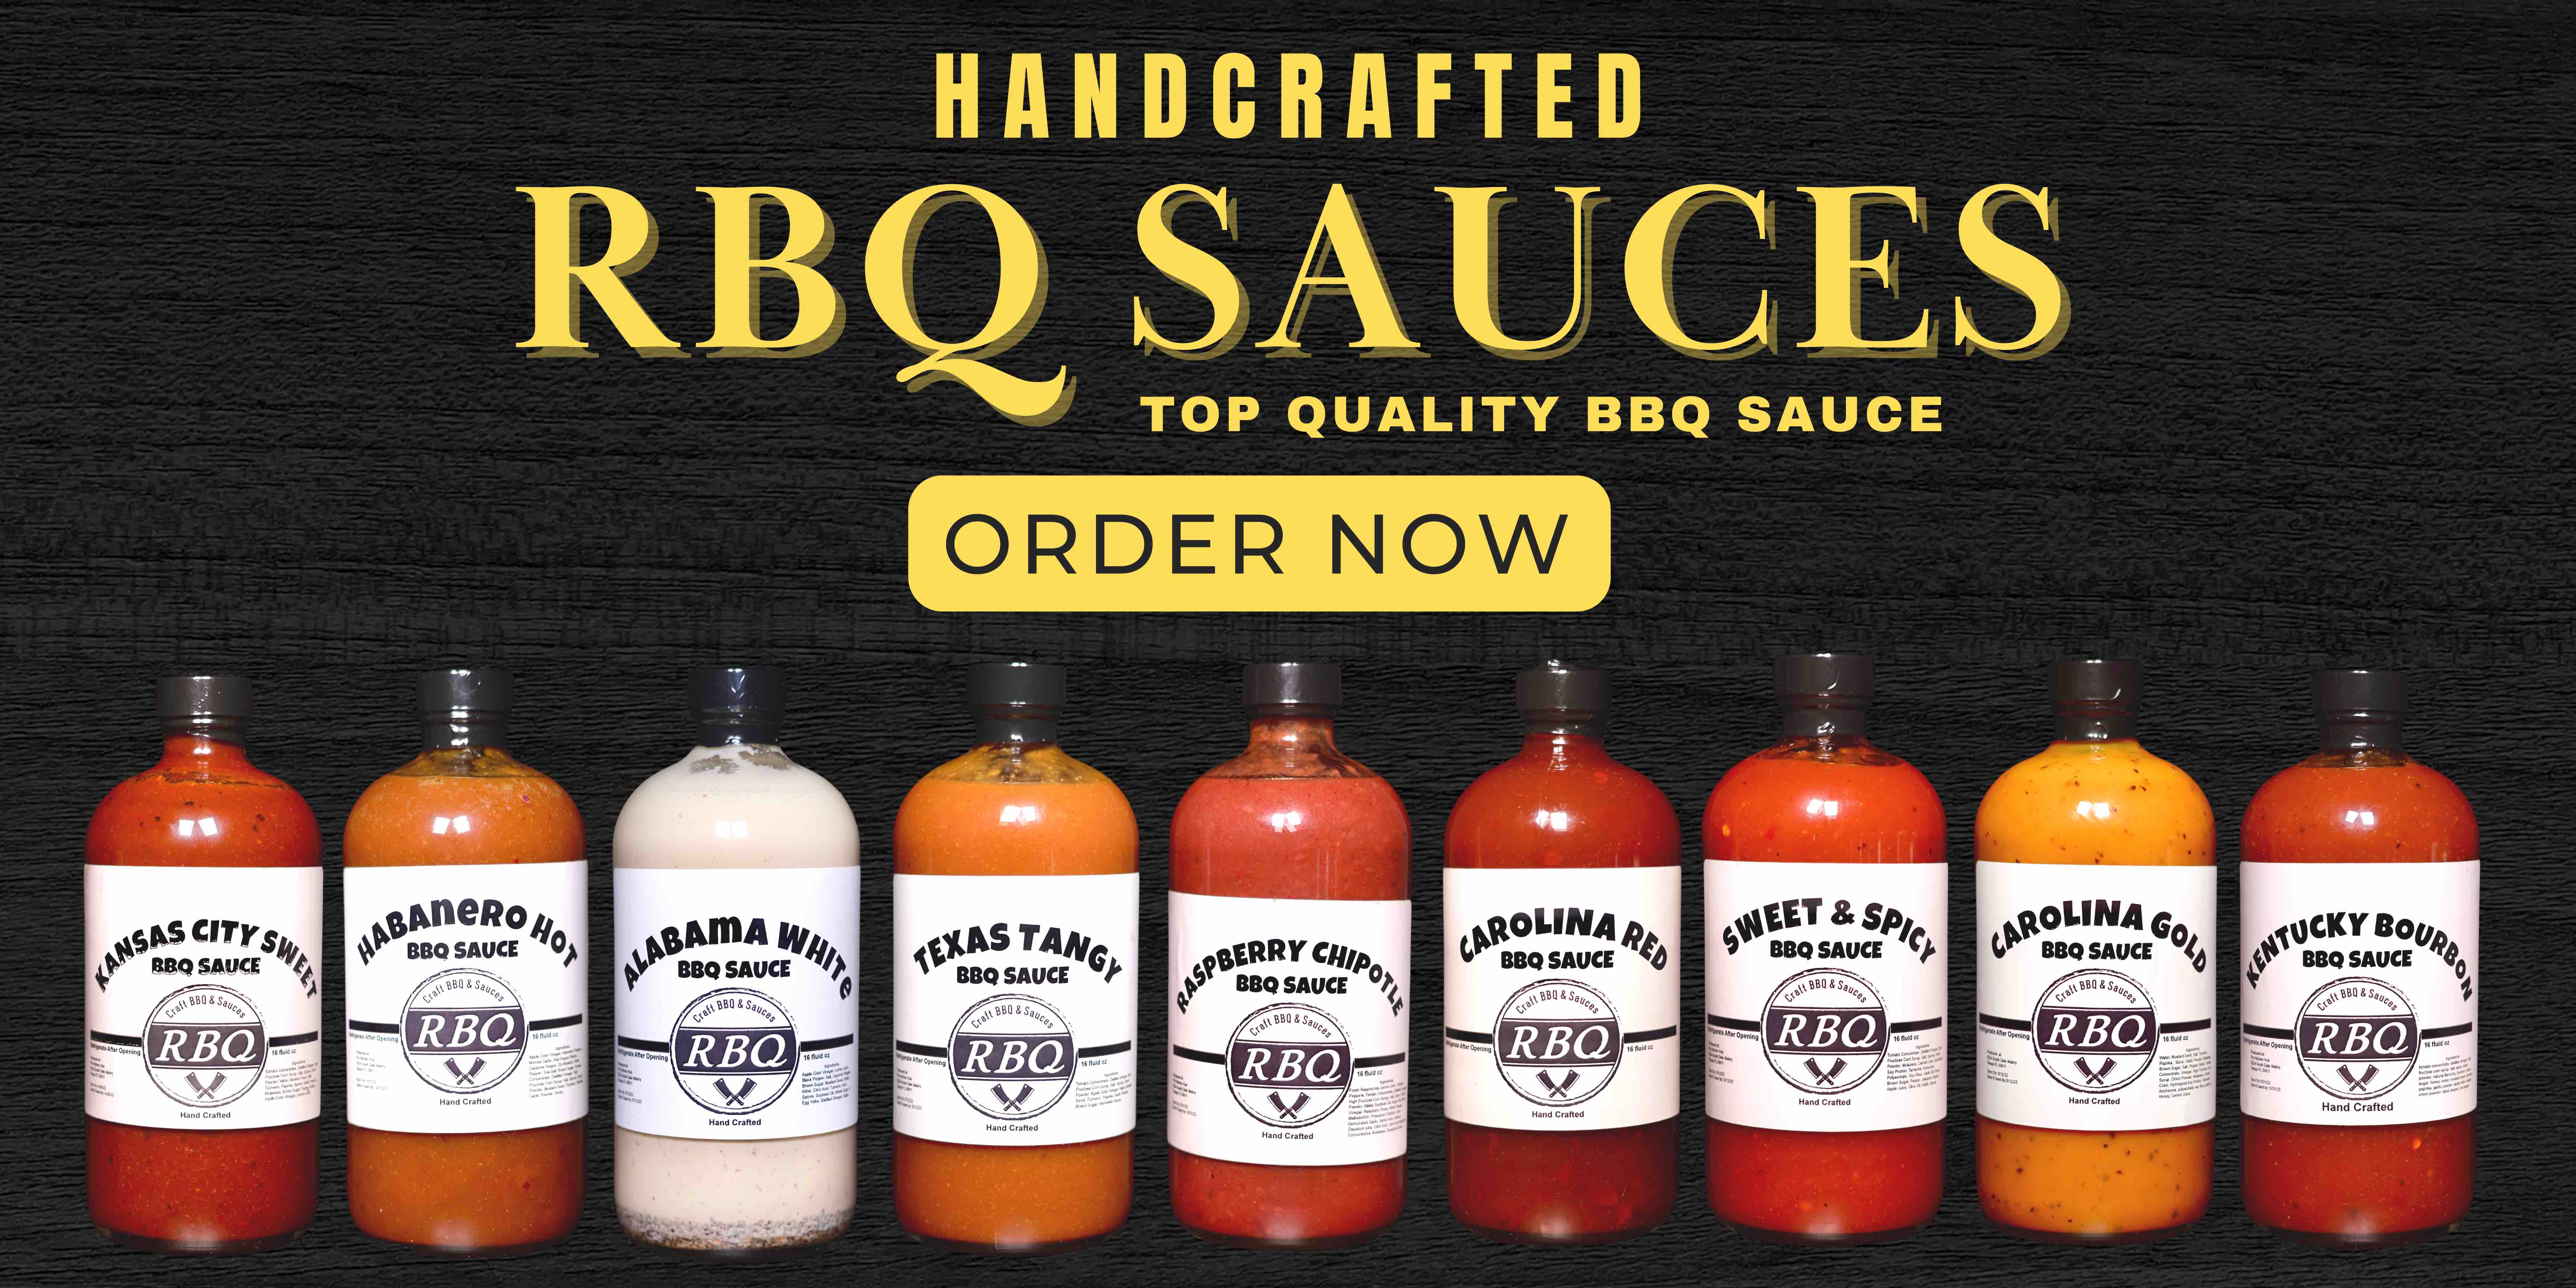 Nine different bottles of BBQ sauces from lined up from left to right